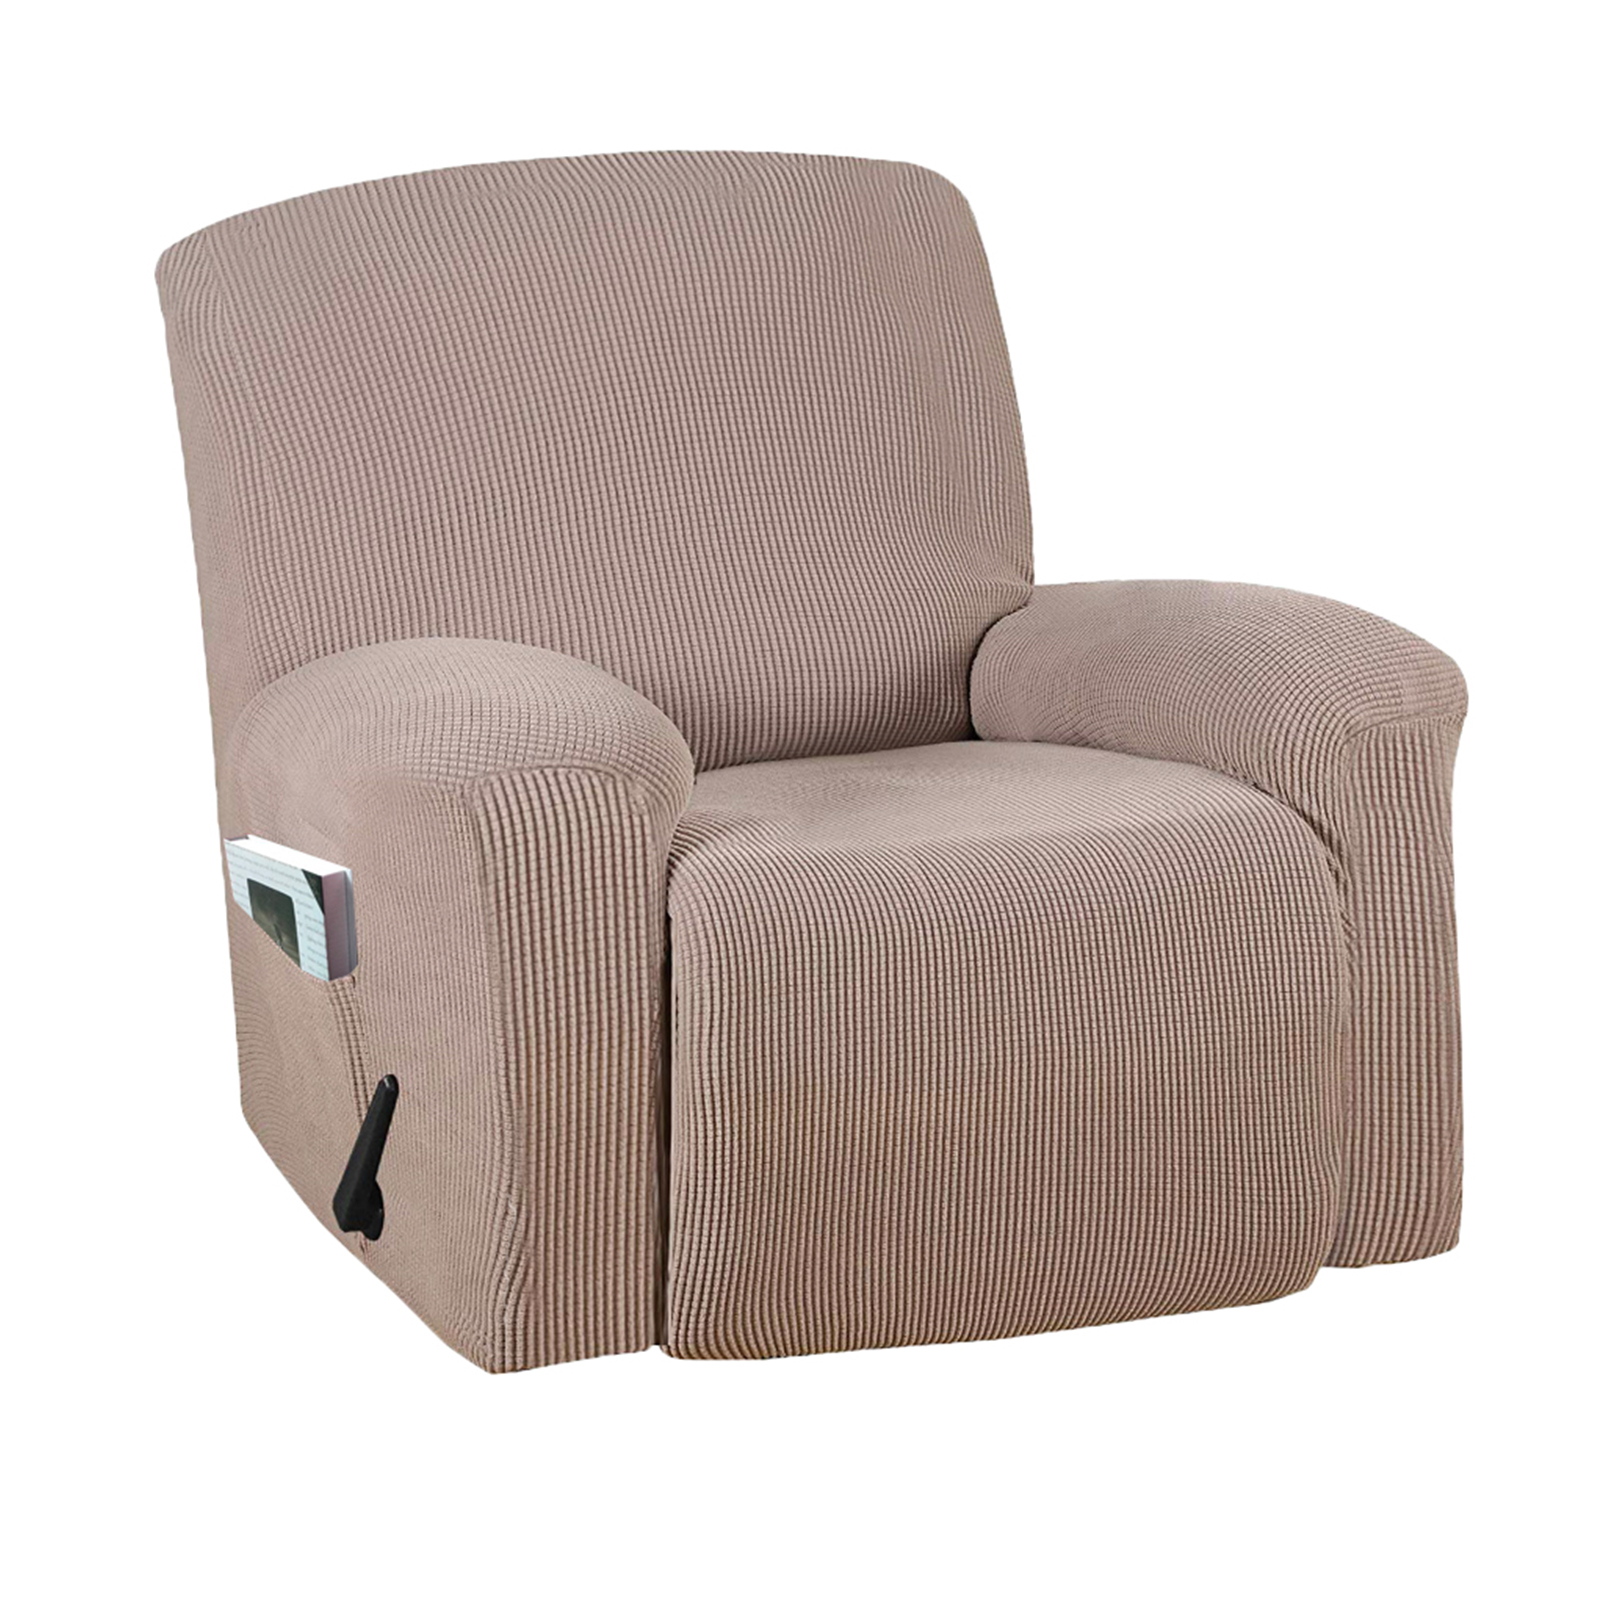 4 Pieces Elastic Bottom Home Decor Furniture Protection Daily Recliner Chair Cover Anti Slip Soft Stretch Living Room Washable